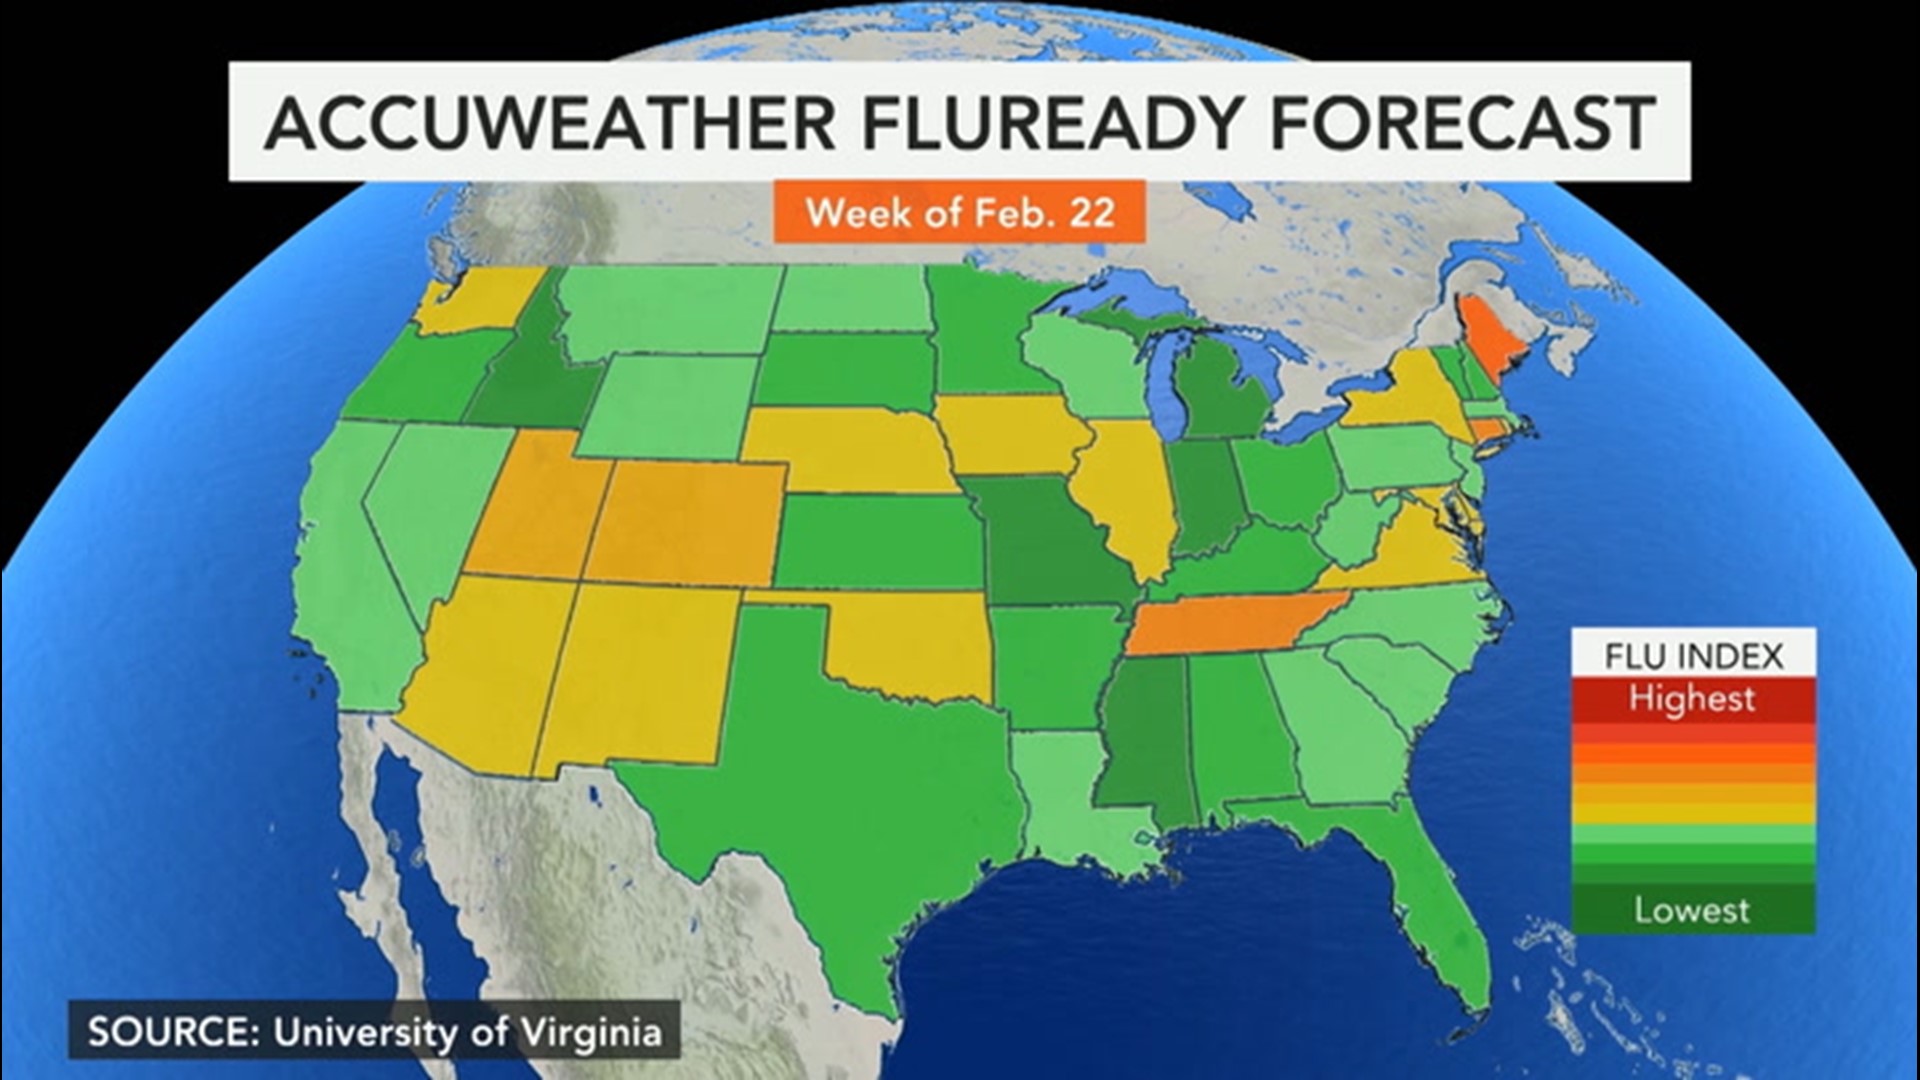 AccuWeather's Bill Wadell broadcasts from the Biocomplexity Institute of Virginia Tech, where experts say many states are at the highest flu levels they've seen in a decade.